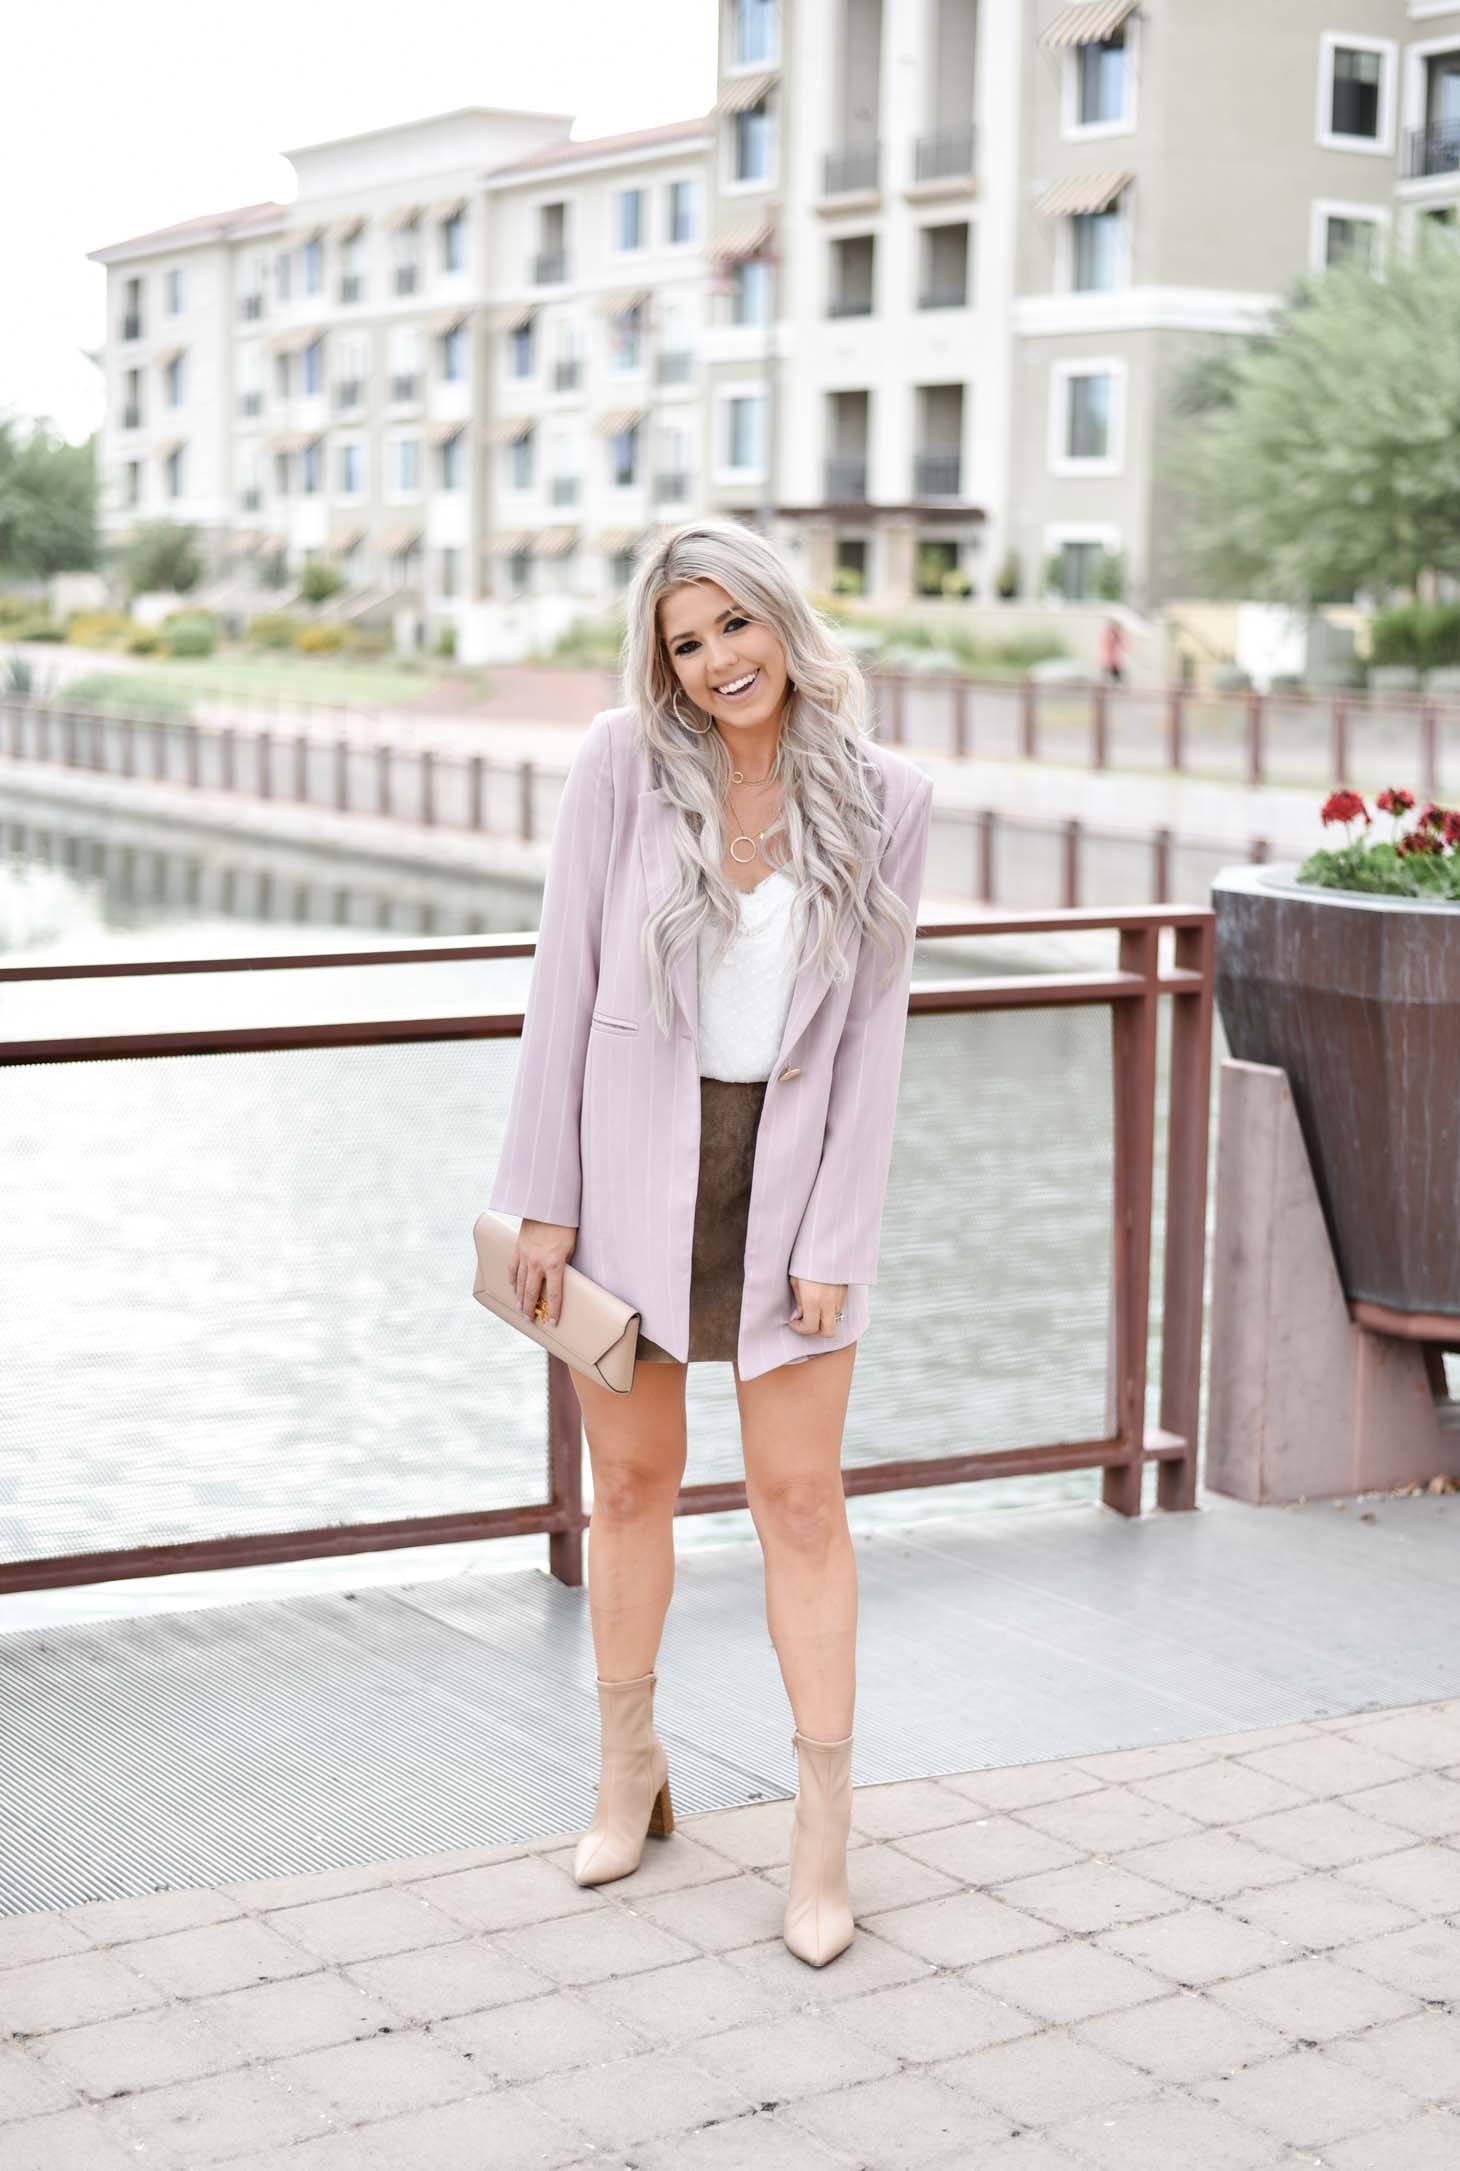 Erin Elizabeth of Wink and a Twirl shares the cutest pinstriped blush blazer from Chicwish